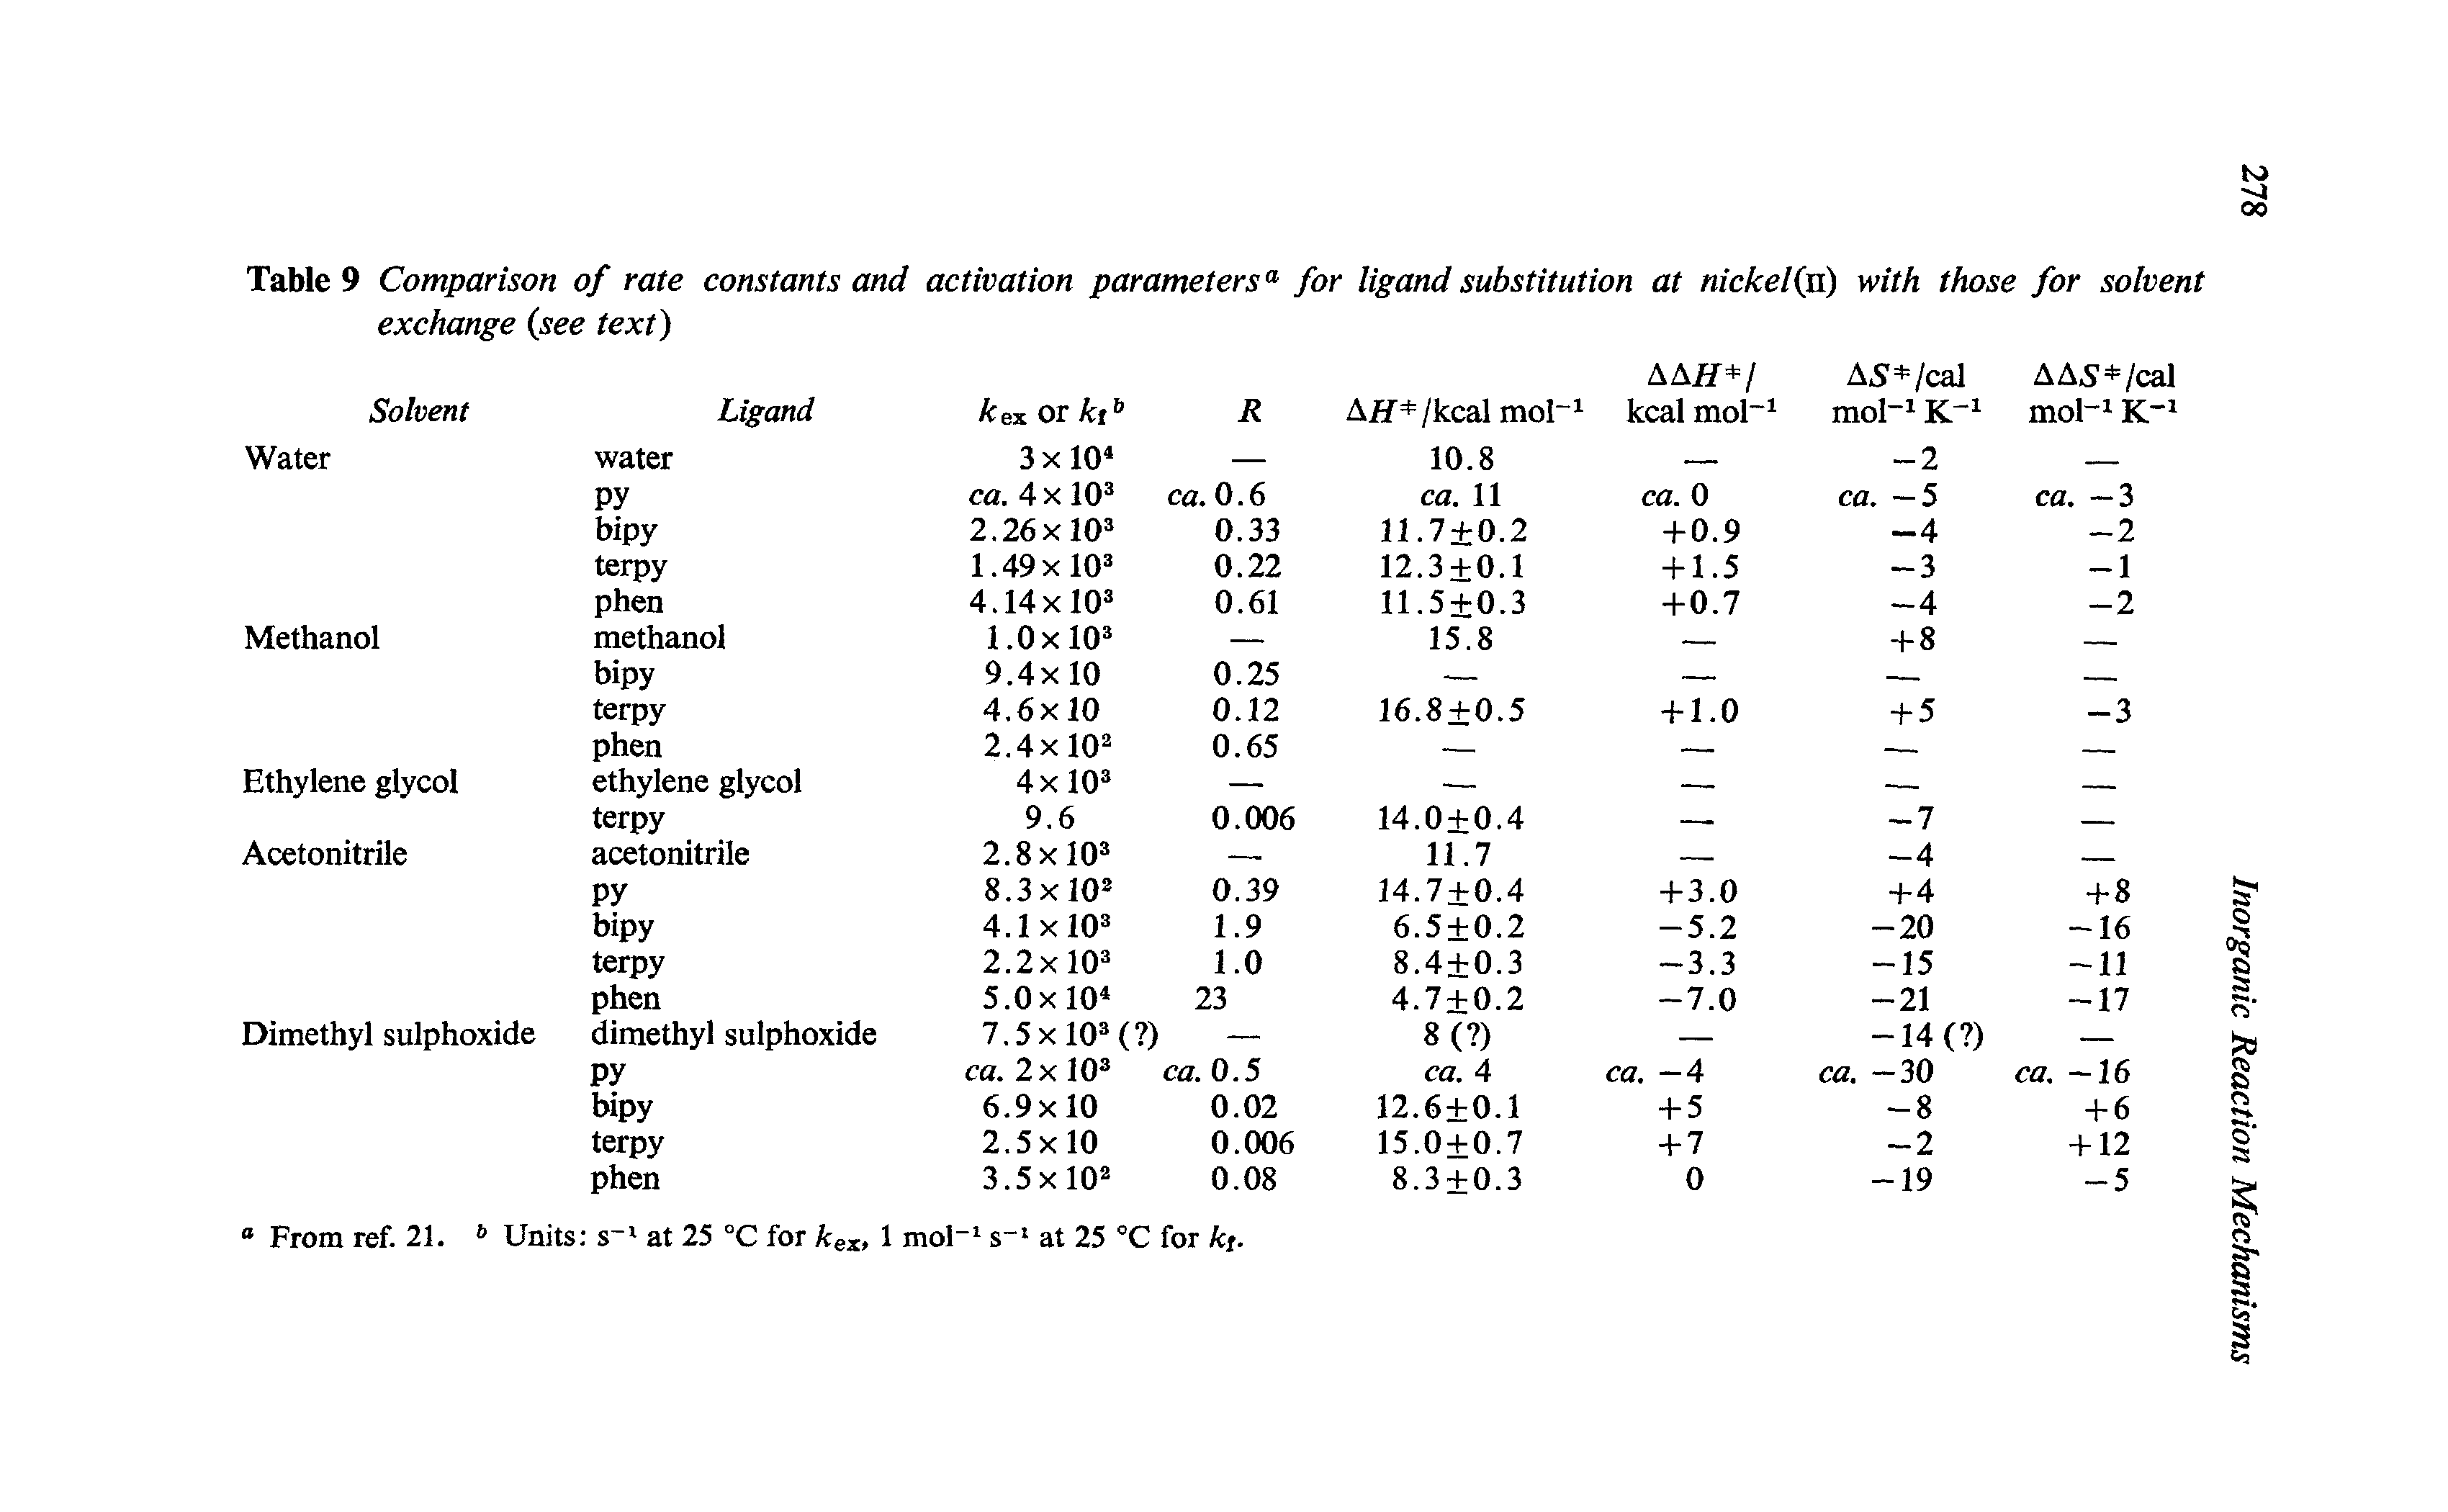 Table 9 Comparison of rate constants and activation parameters for ligand substitution at nickeKji) with those for solvent exchange (see text)...